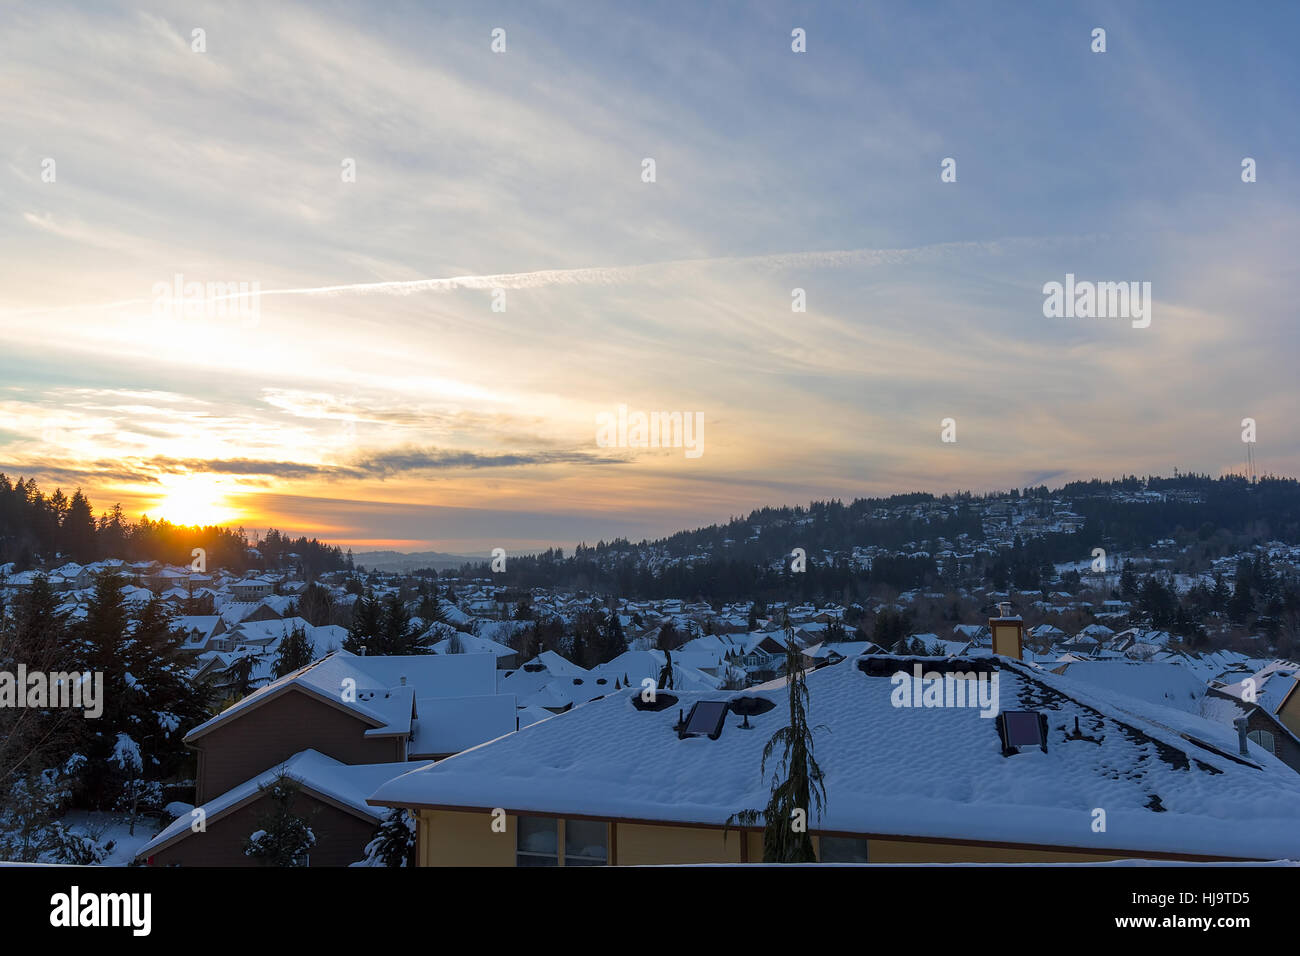 Happy Valley Oregon suburban neighborhood homes covered in snow during winter sunset Stock Photo